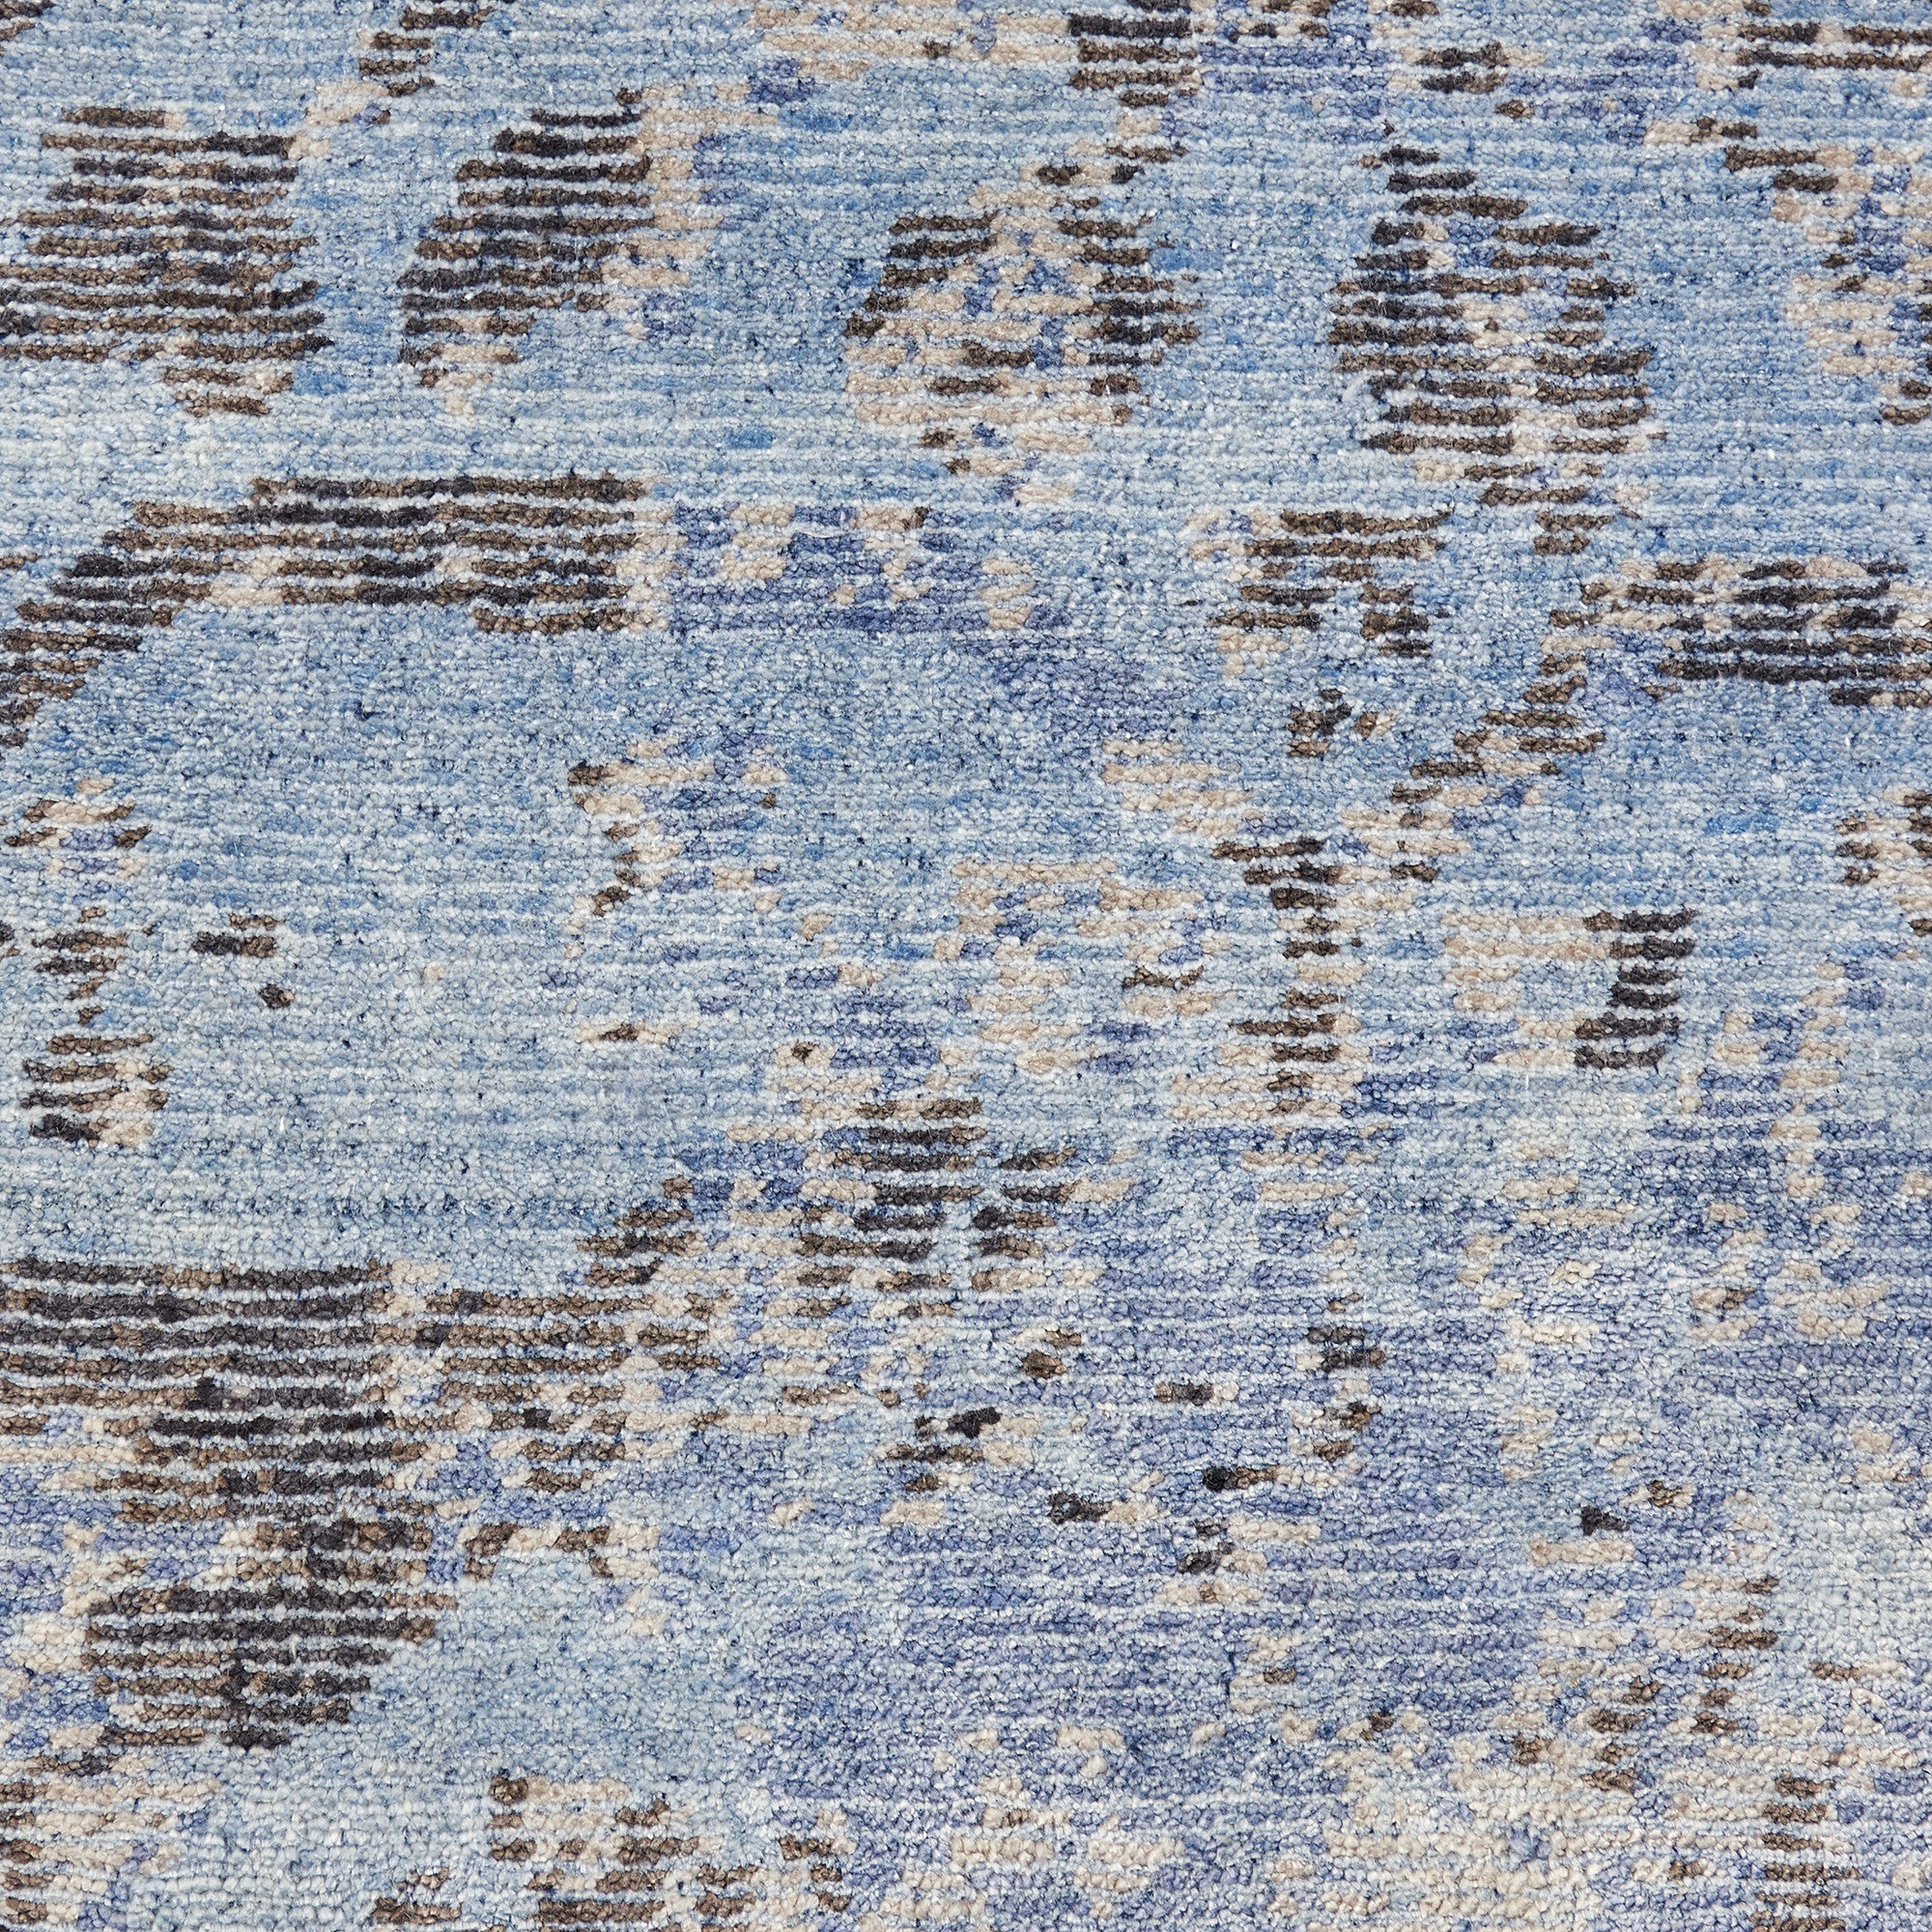 Close-up of a vintage-style blue carpet with abstract patterns.